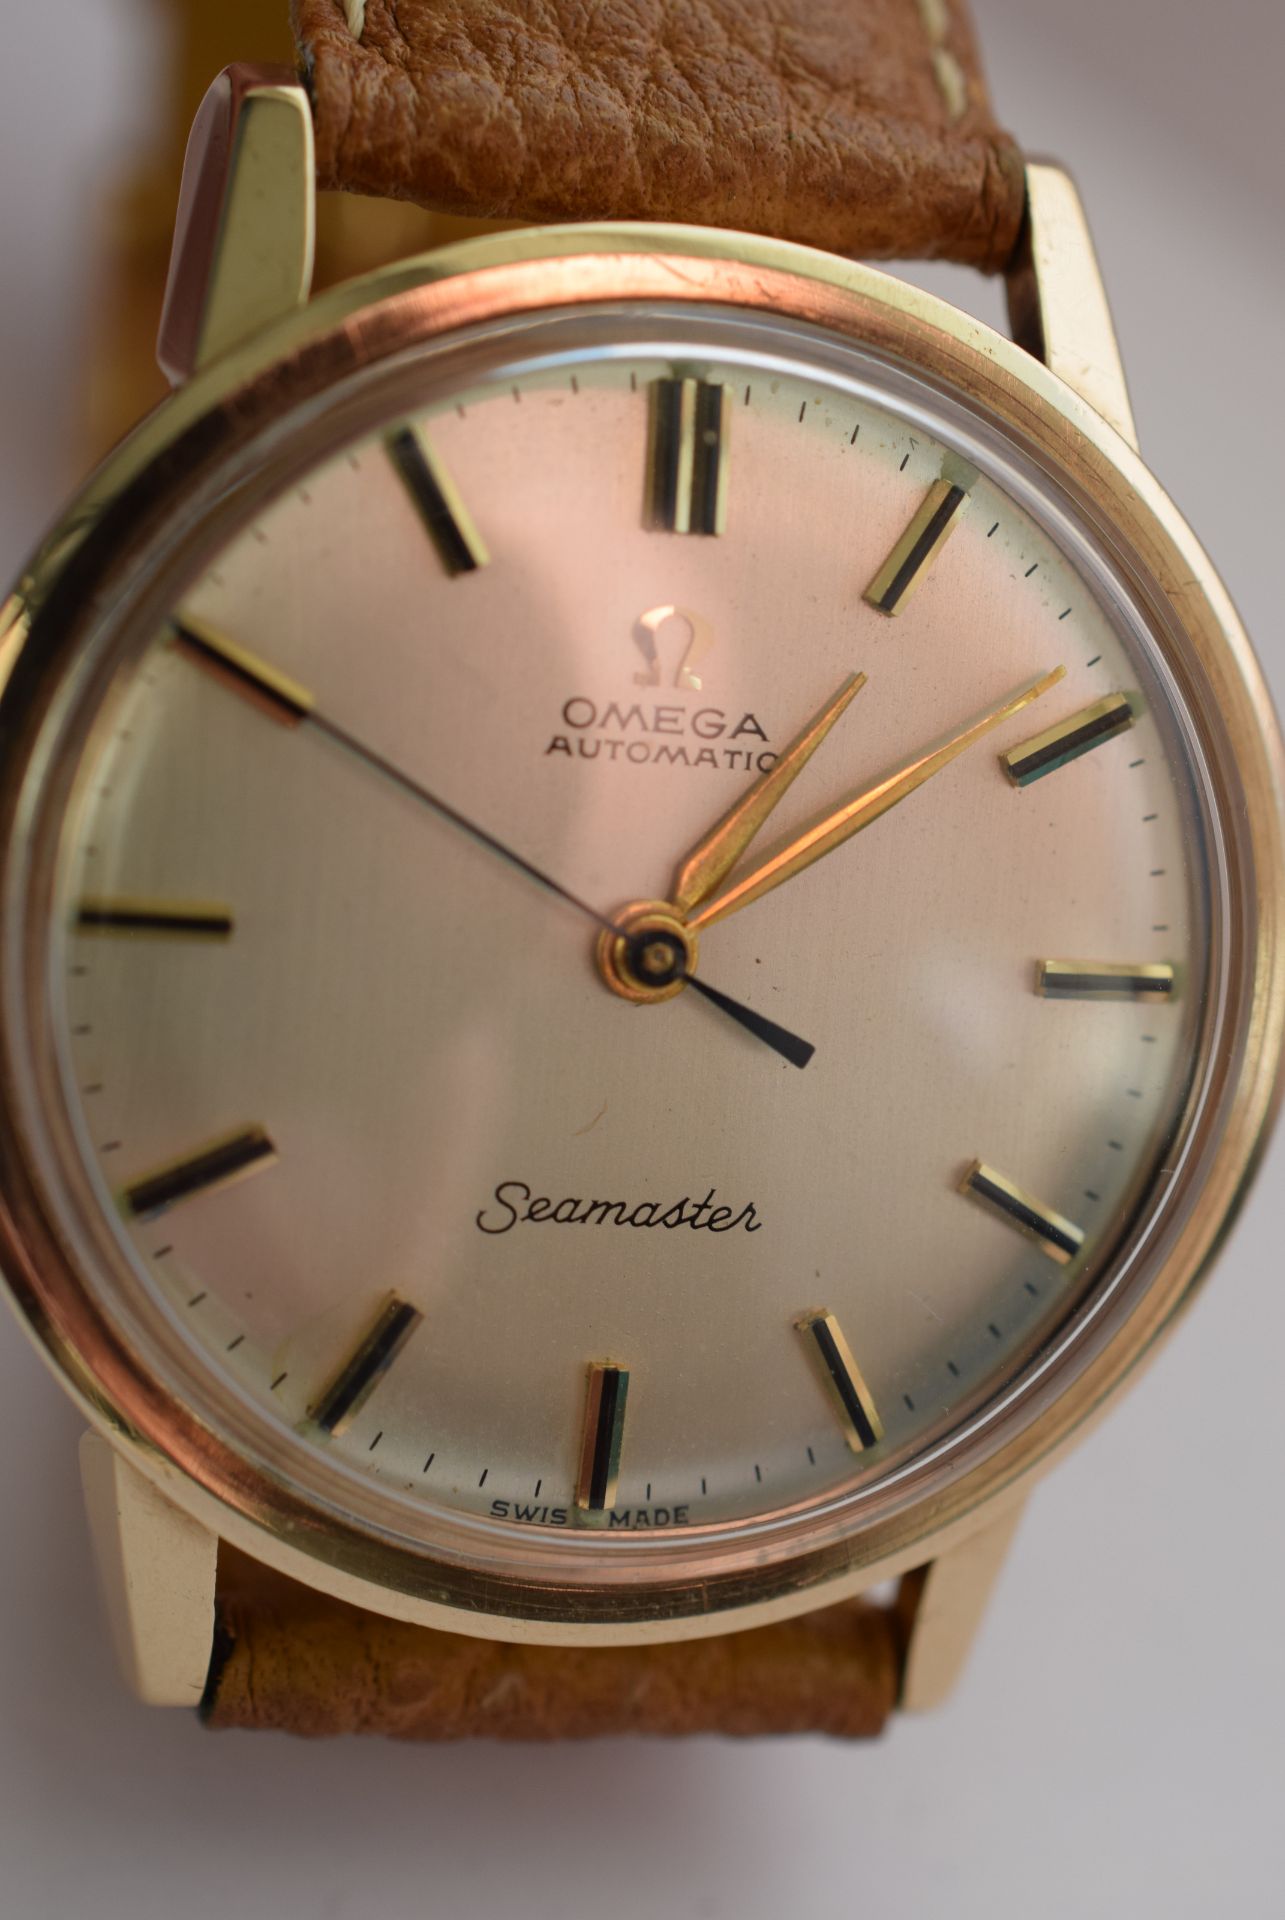 Omega Seamaster Automatic In 9ct Gold Case ***RESERVE LOWERED*** - Image 2 of 8